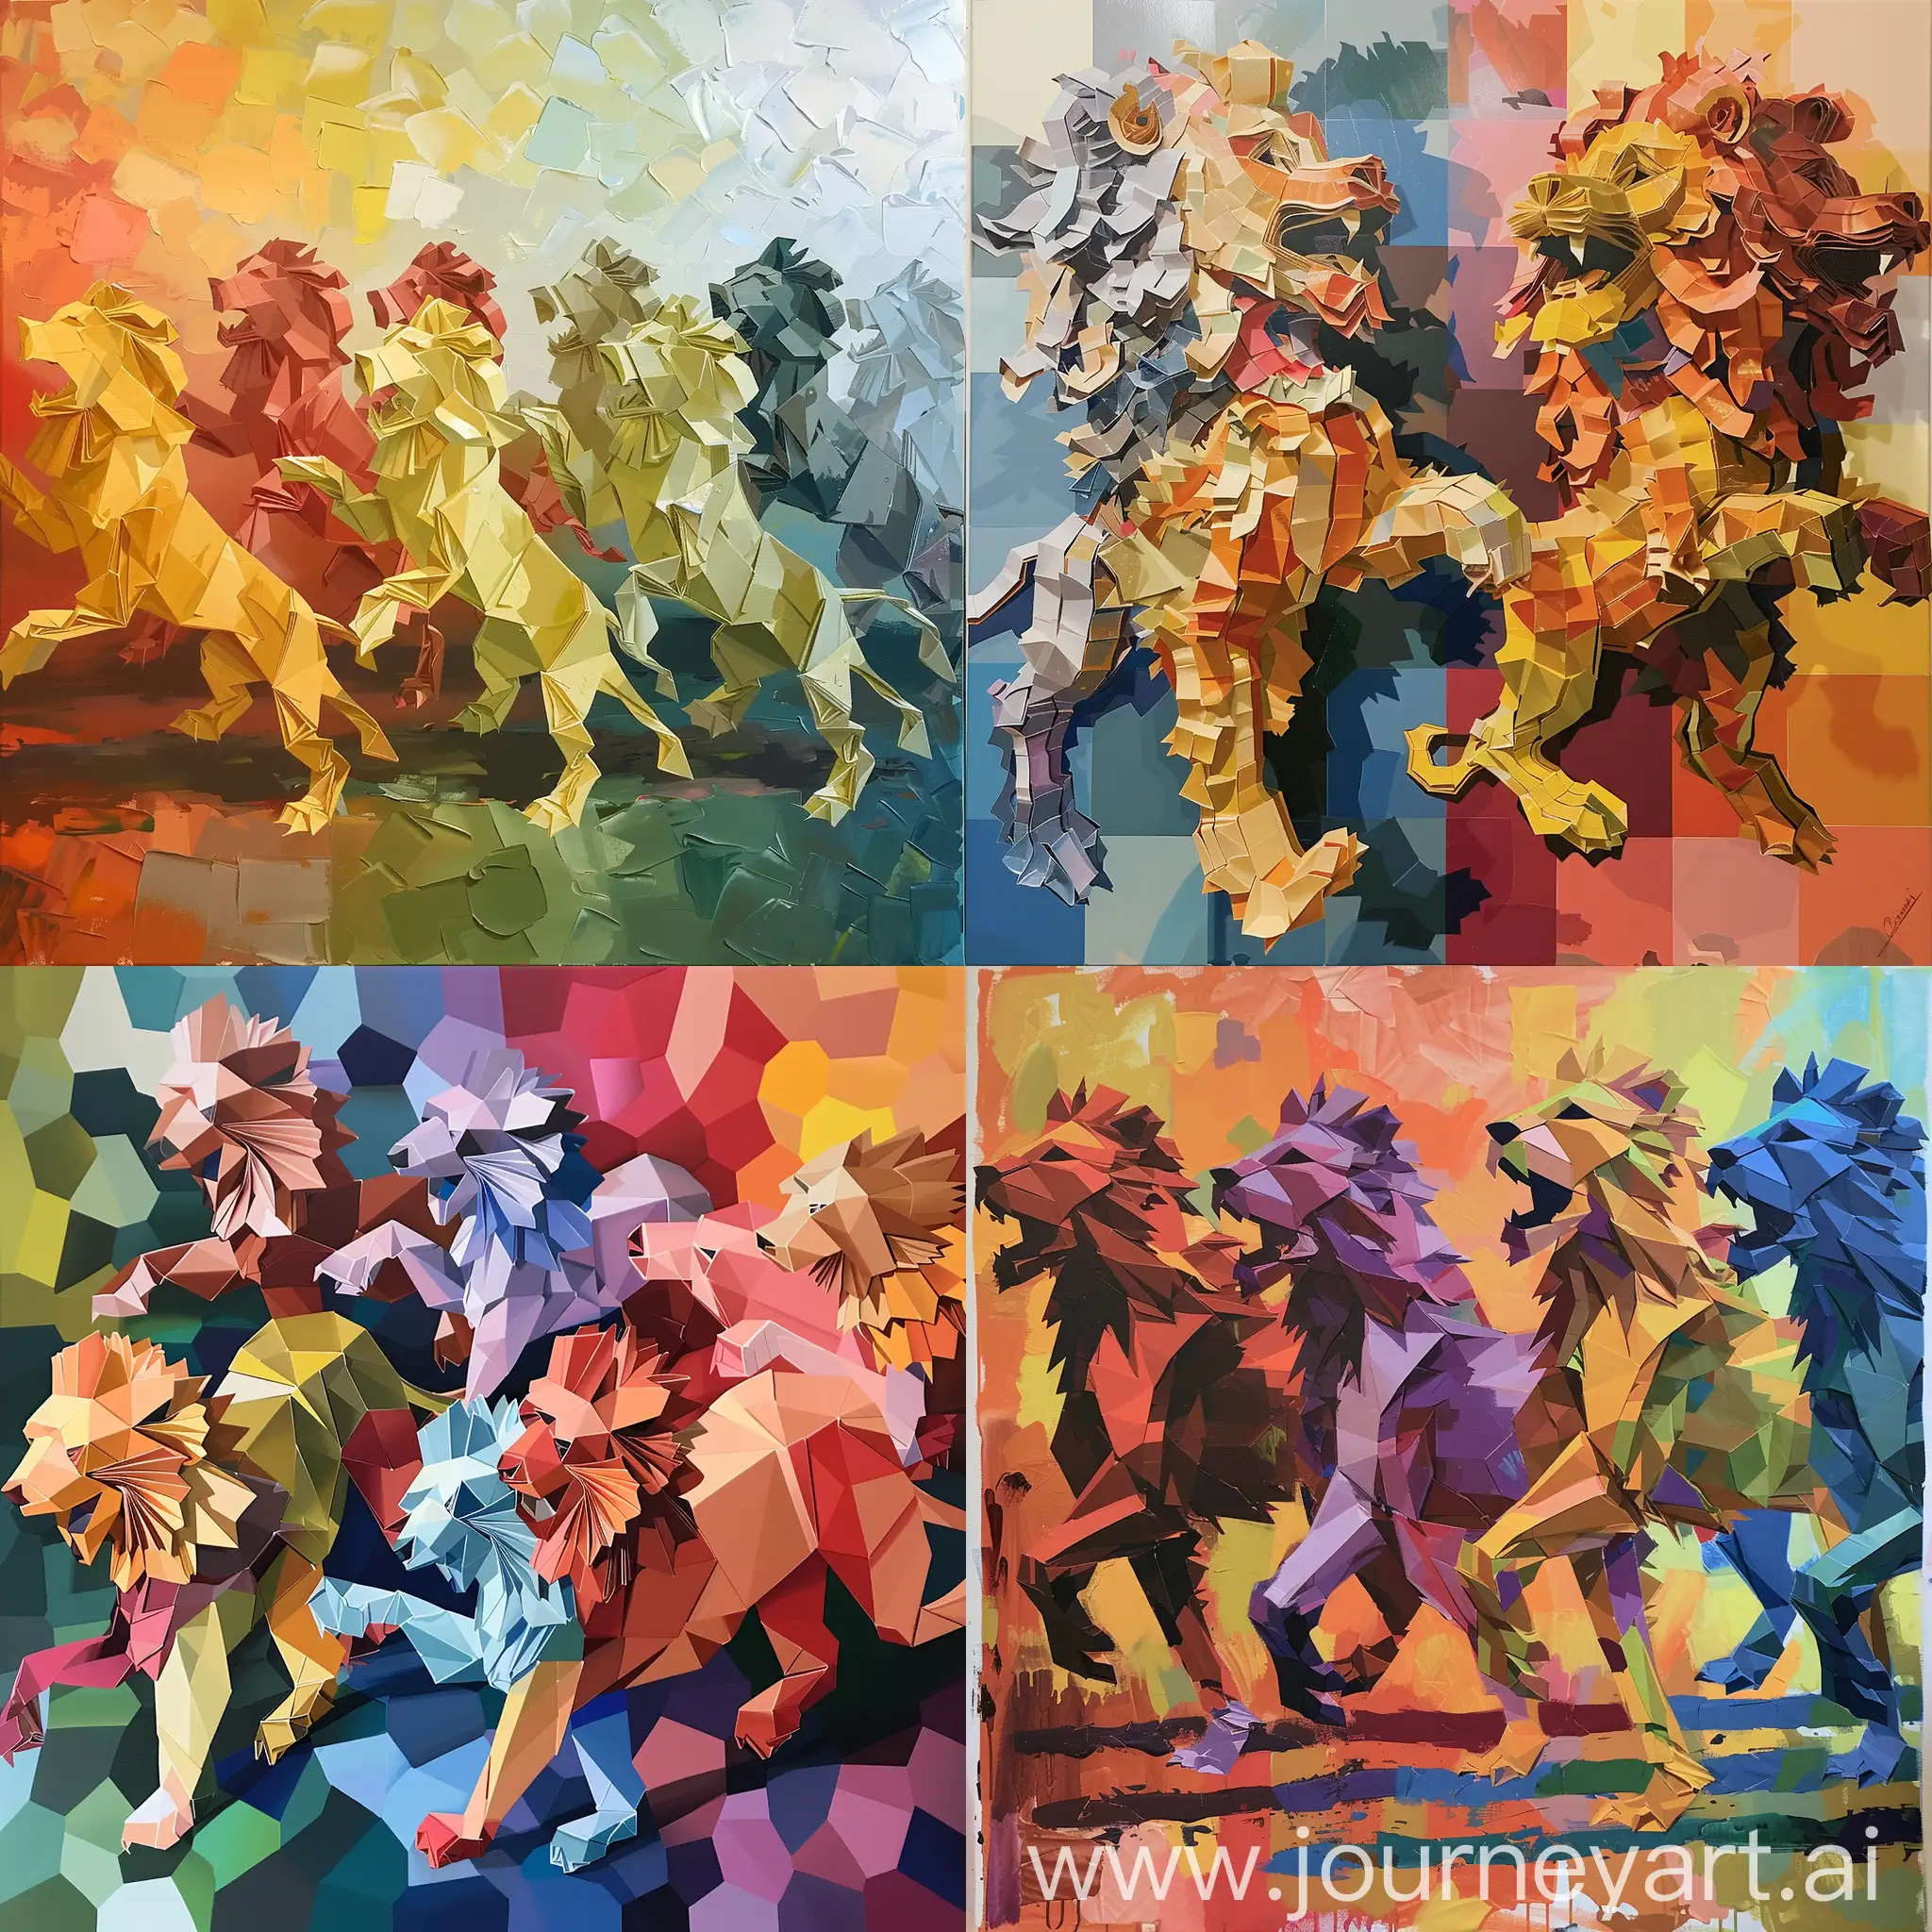 Vibrant-Dancing-Paper-Lions-Whimsical-Artwork-with-Colorful-Lion-Figures